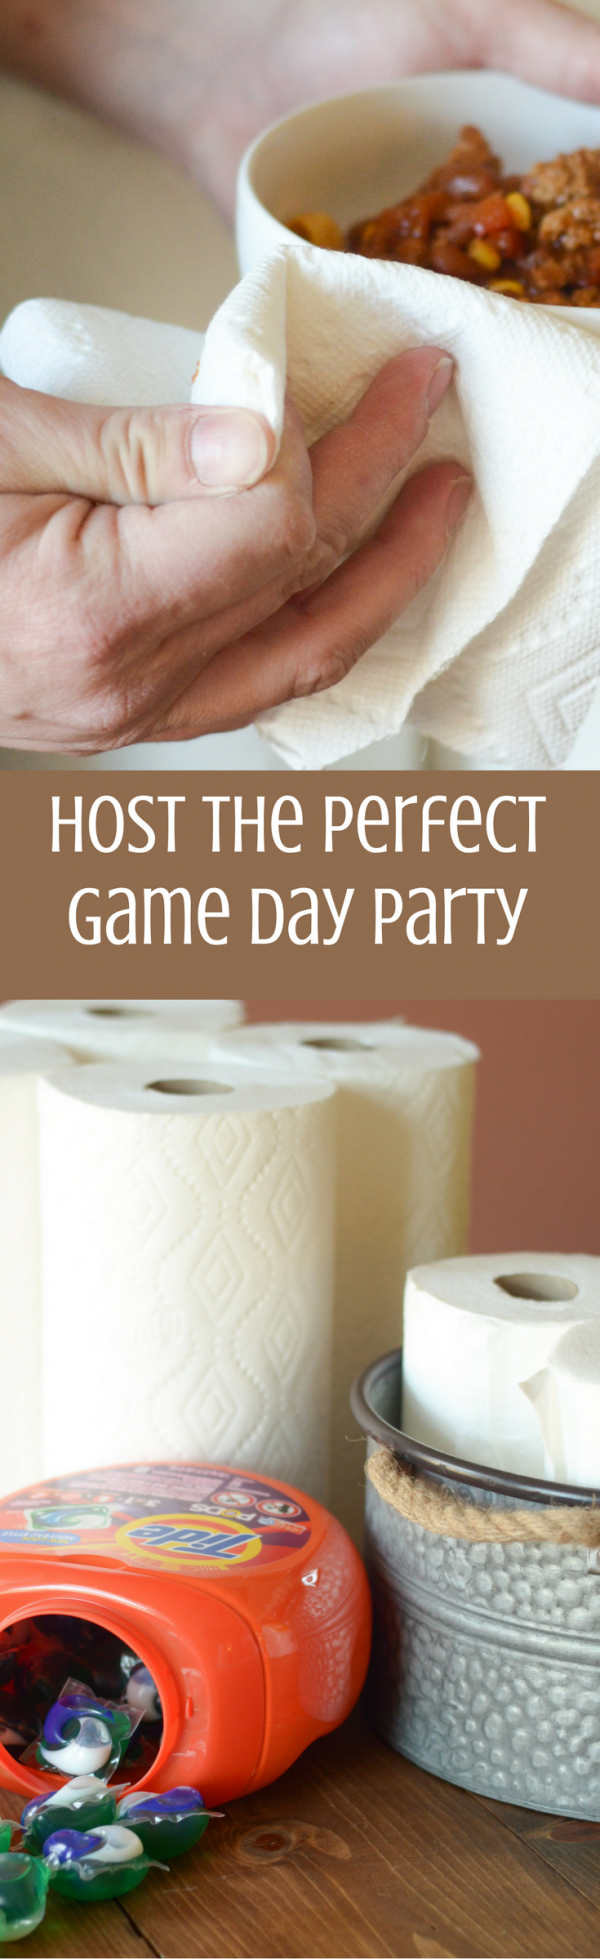 Host the Perfect Game Day Party with these 10 Game Day Recipes